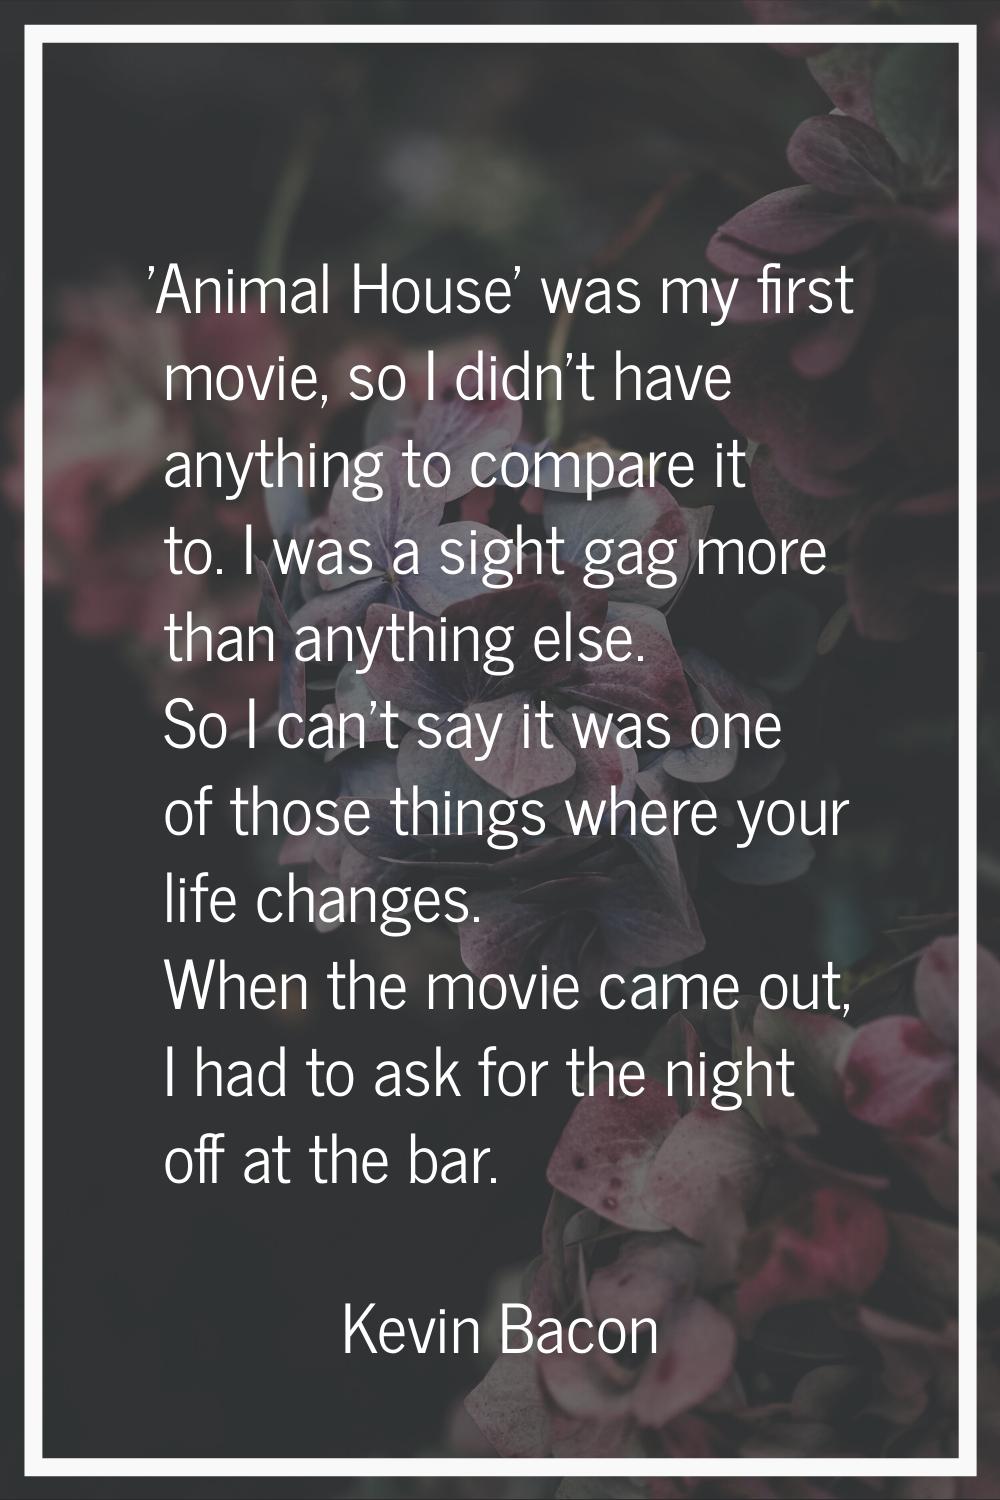 'Animal House' was my first movie, so I didn't have anything to compare it to. I was a sight gag mo